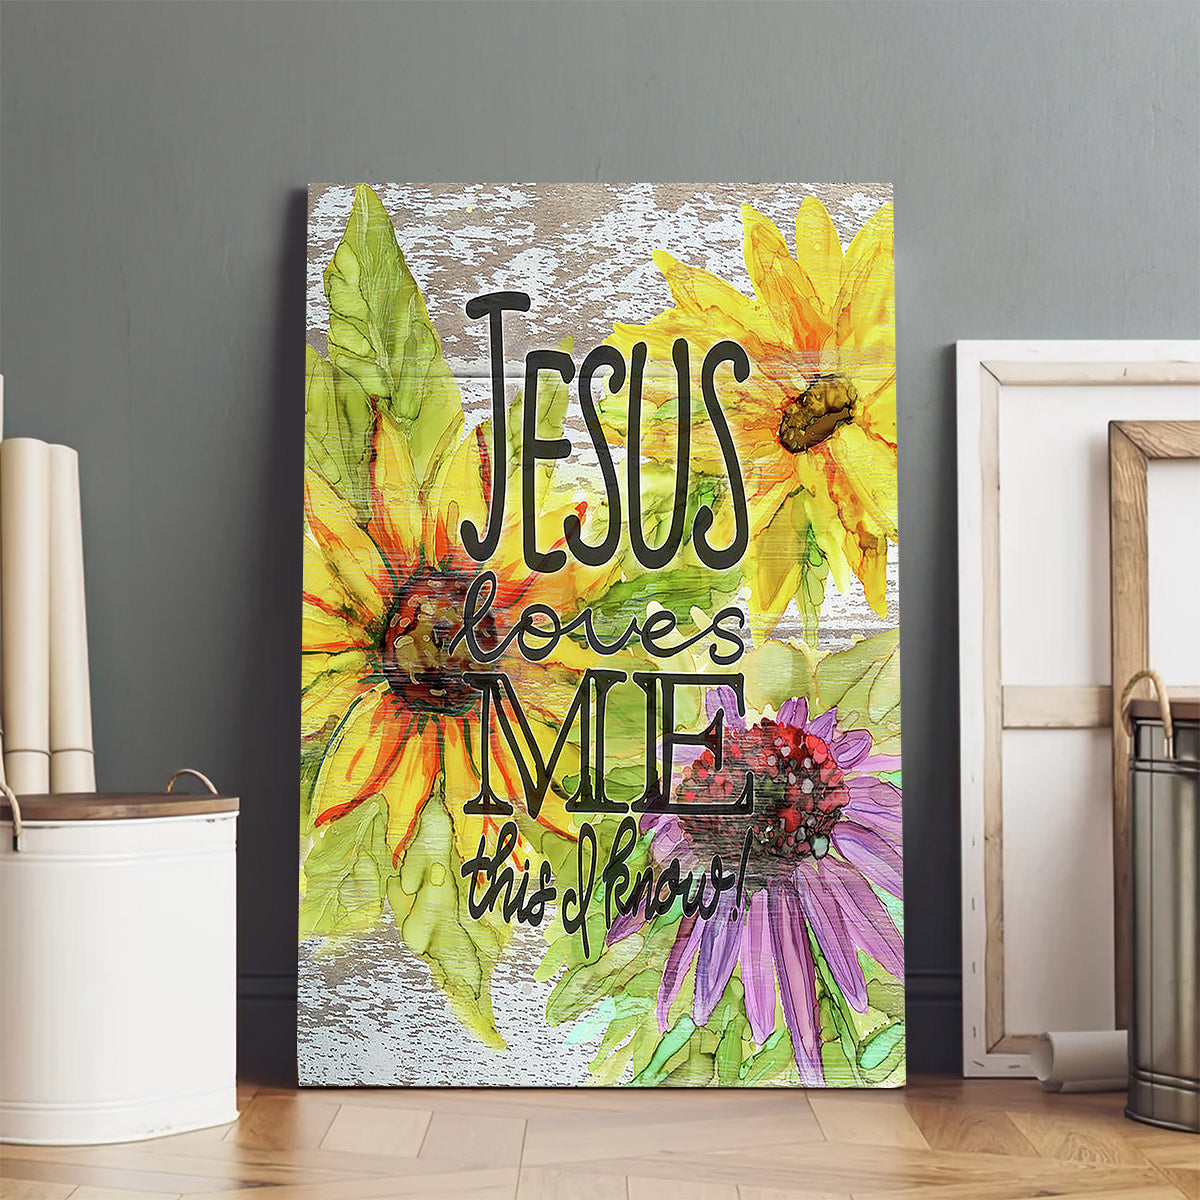 Jesus Loves Me  Canvas Wall Art - Jesus Canvas Pictures - Christian Wall Art